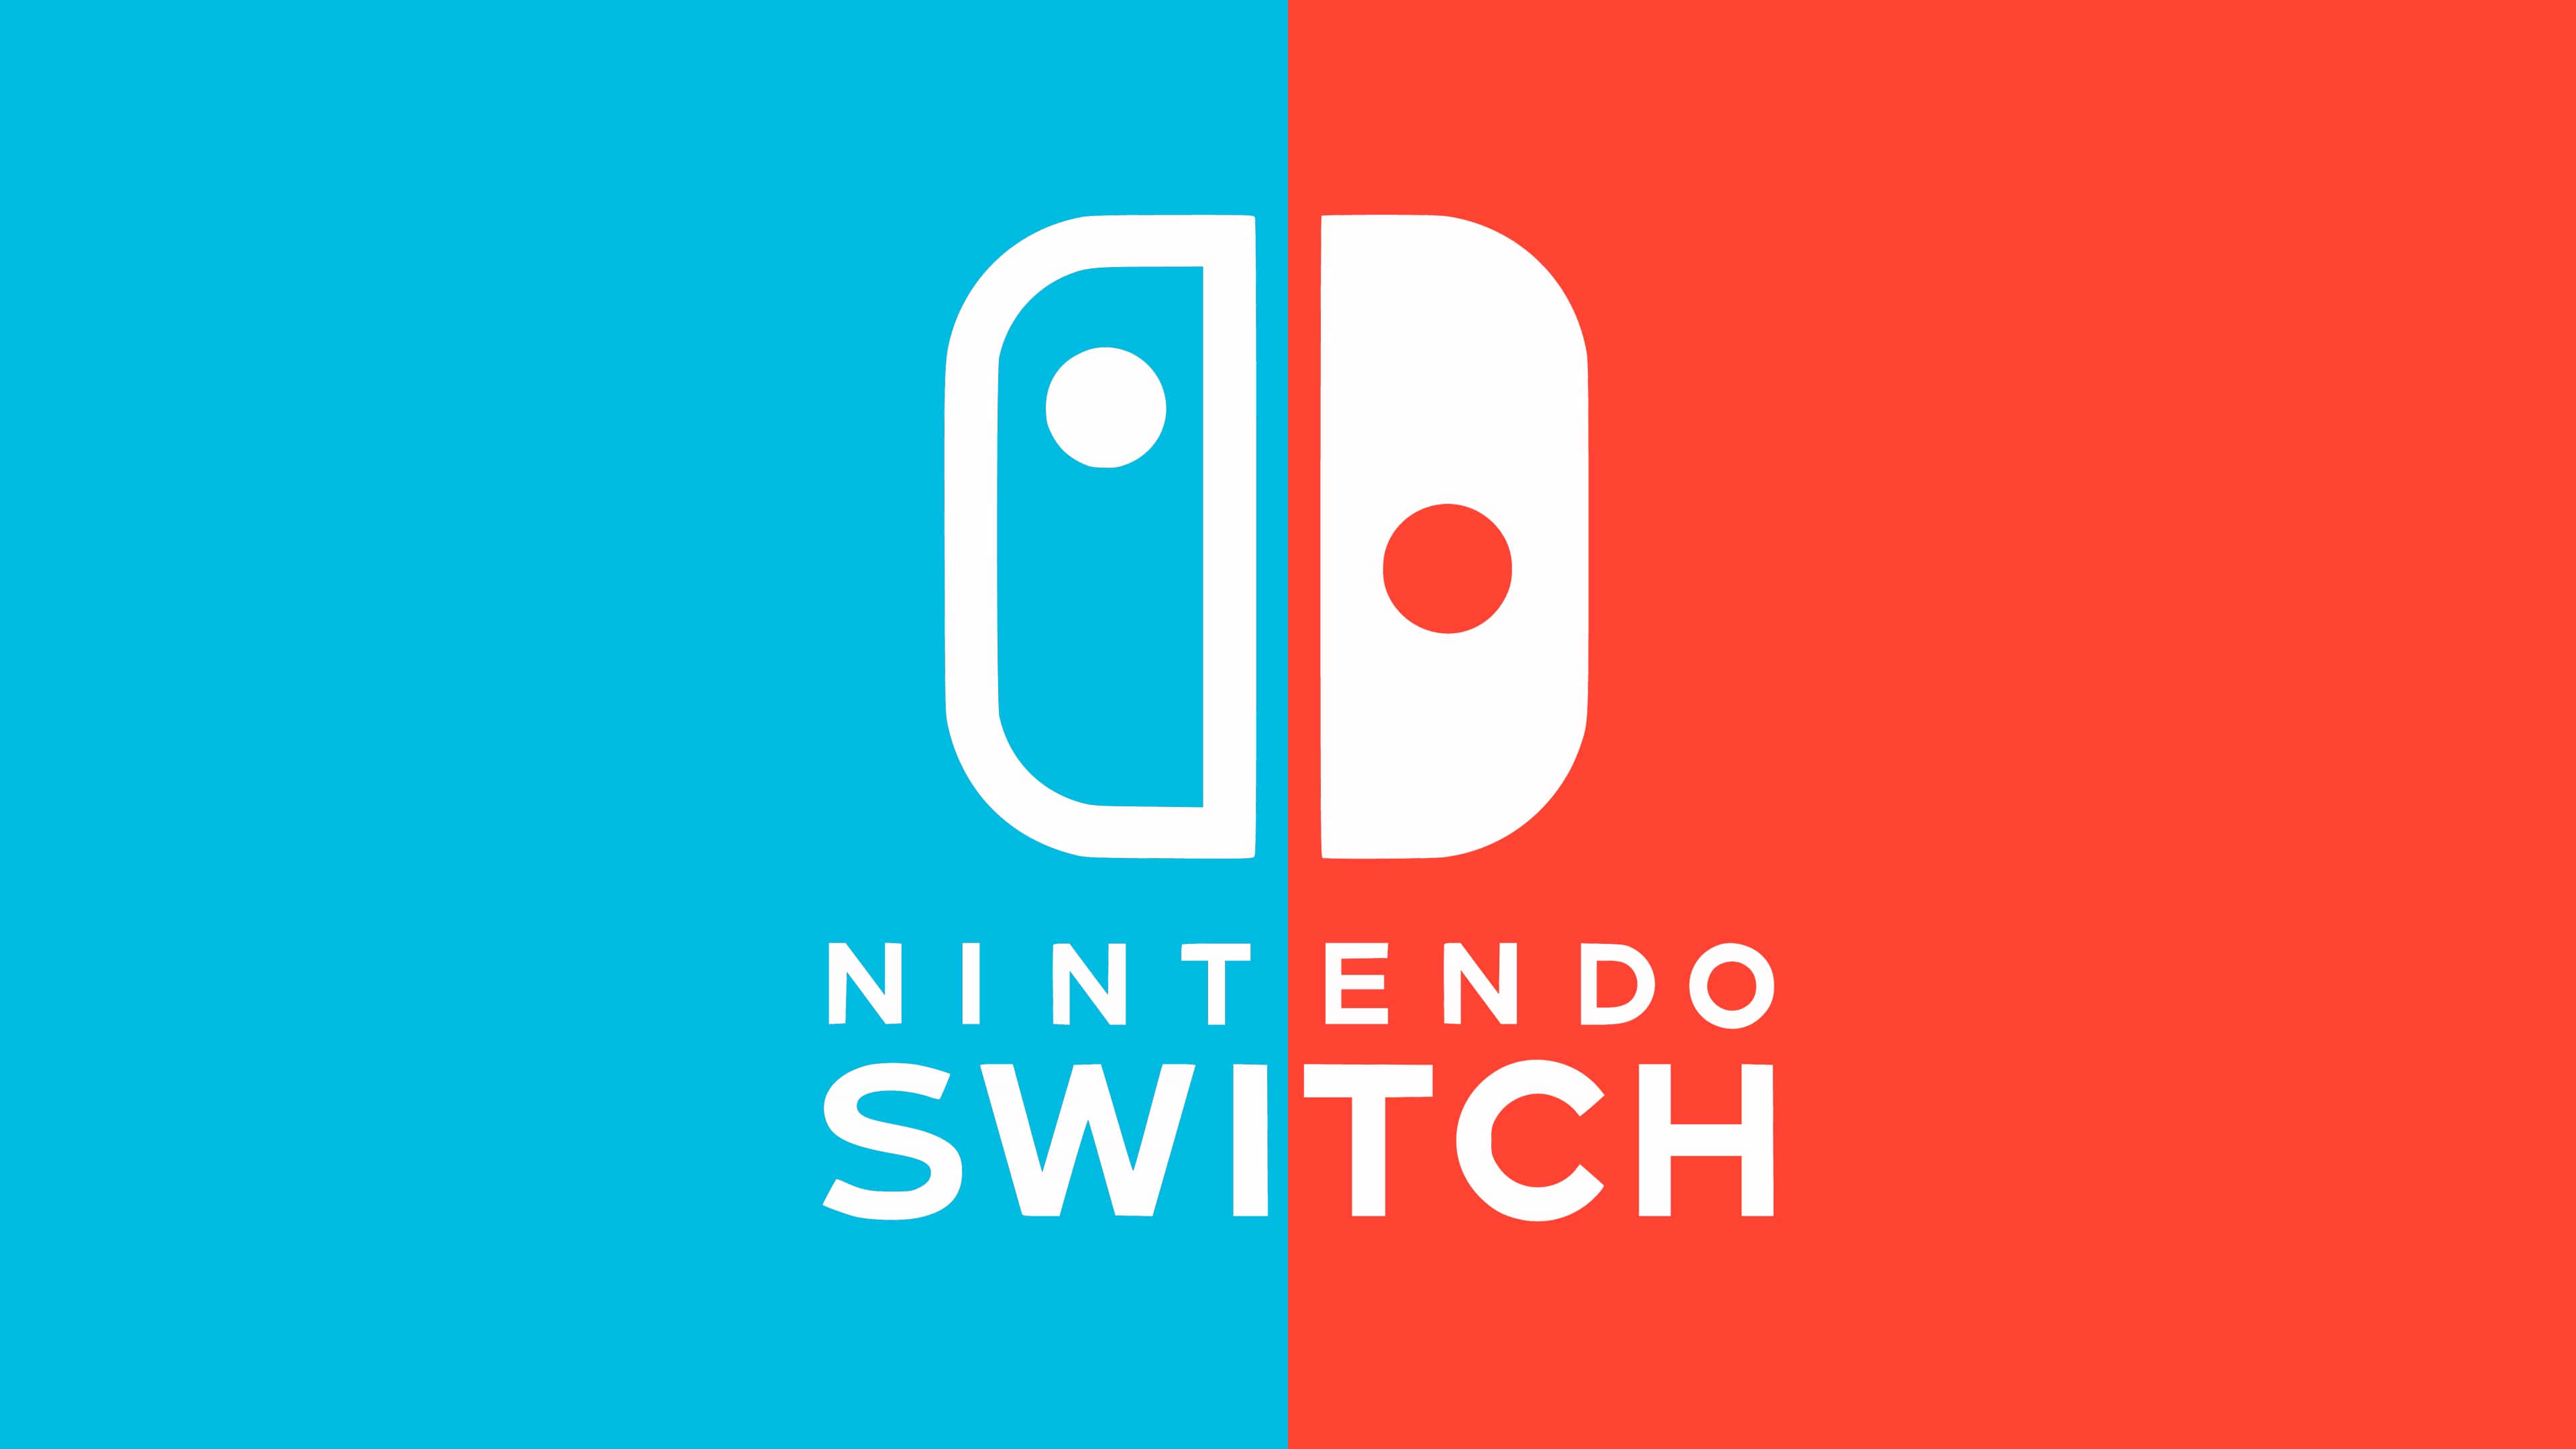 nintendo switch logo blue and red uhd 4k wallpaper